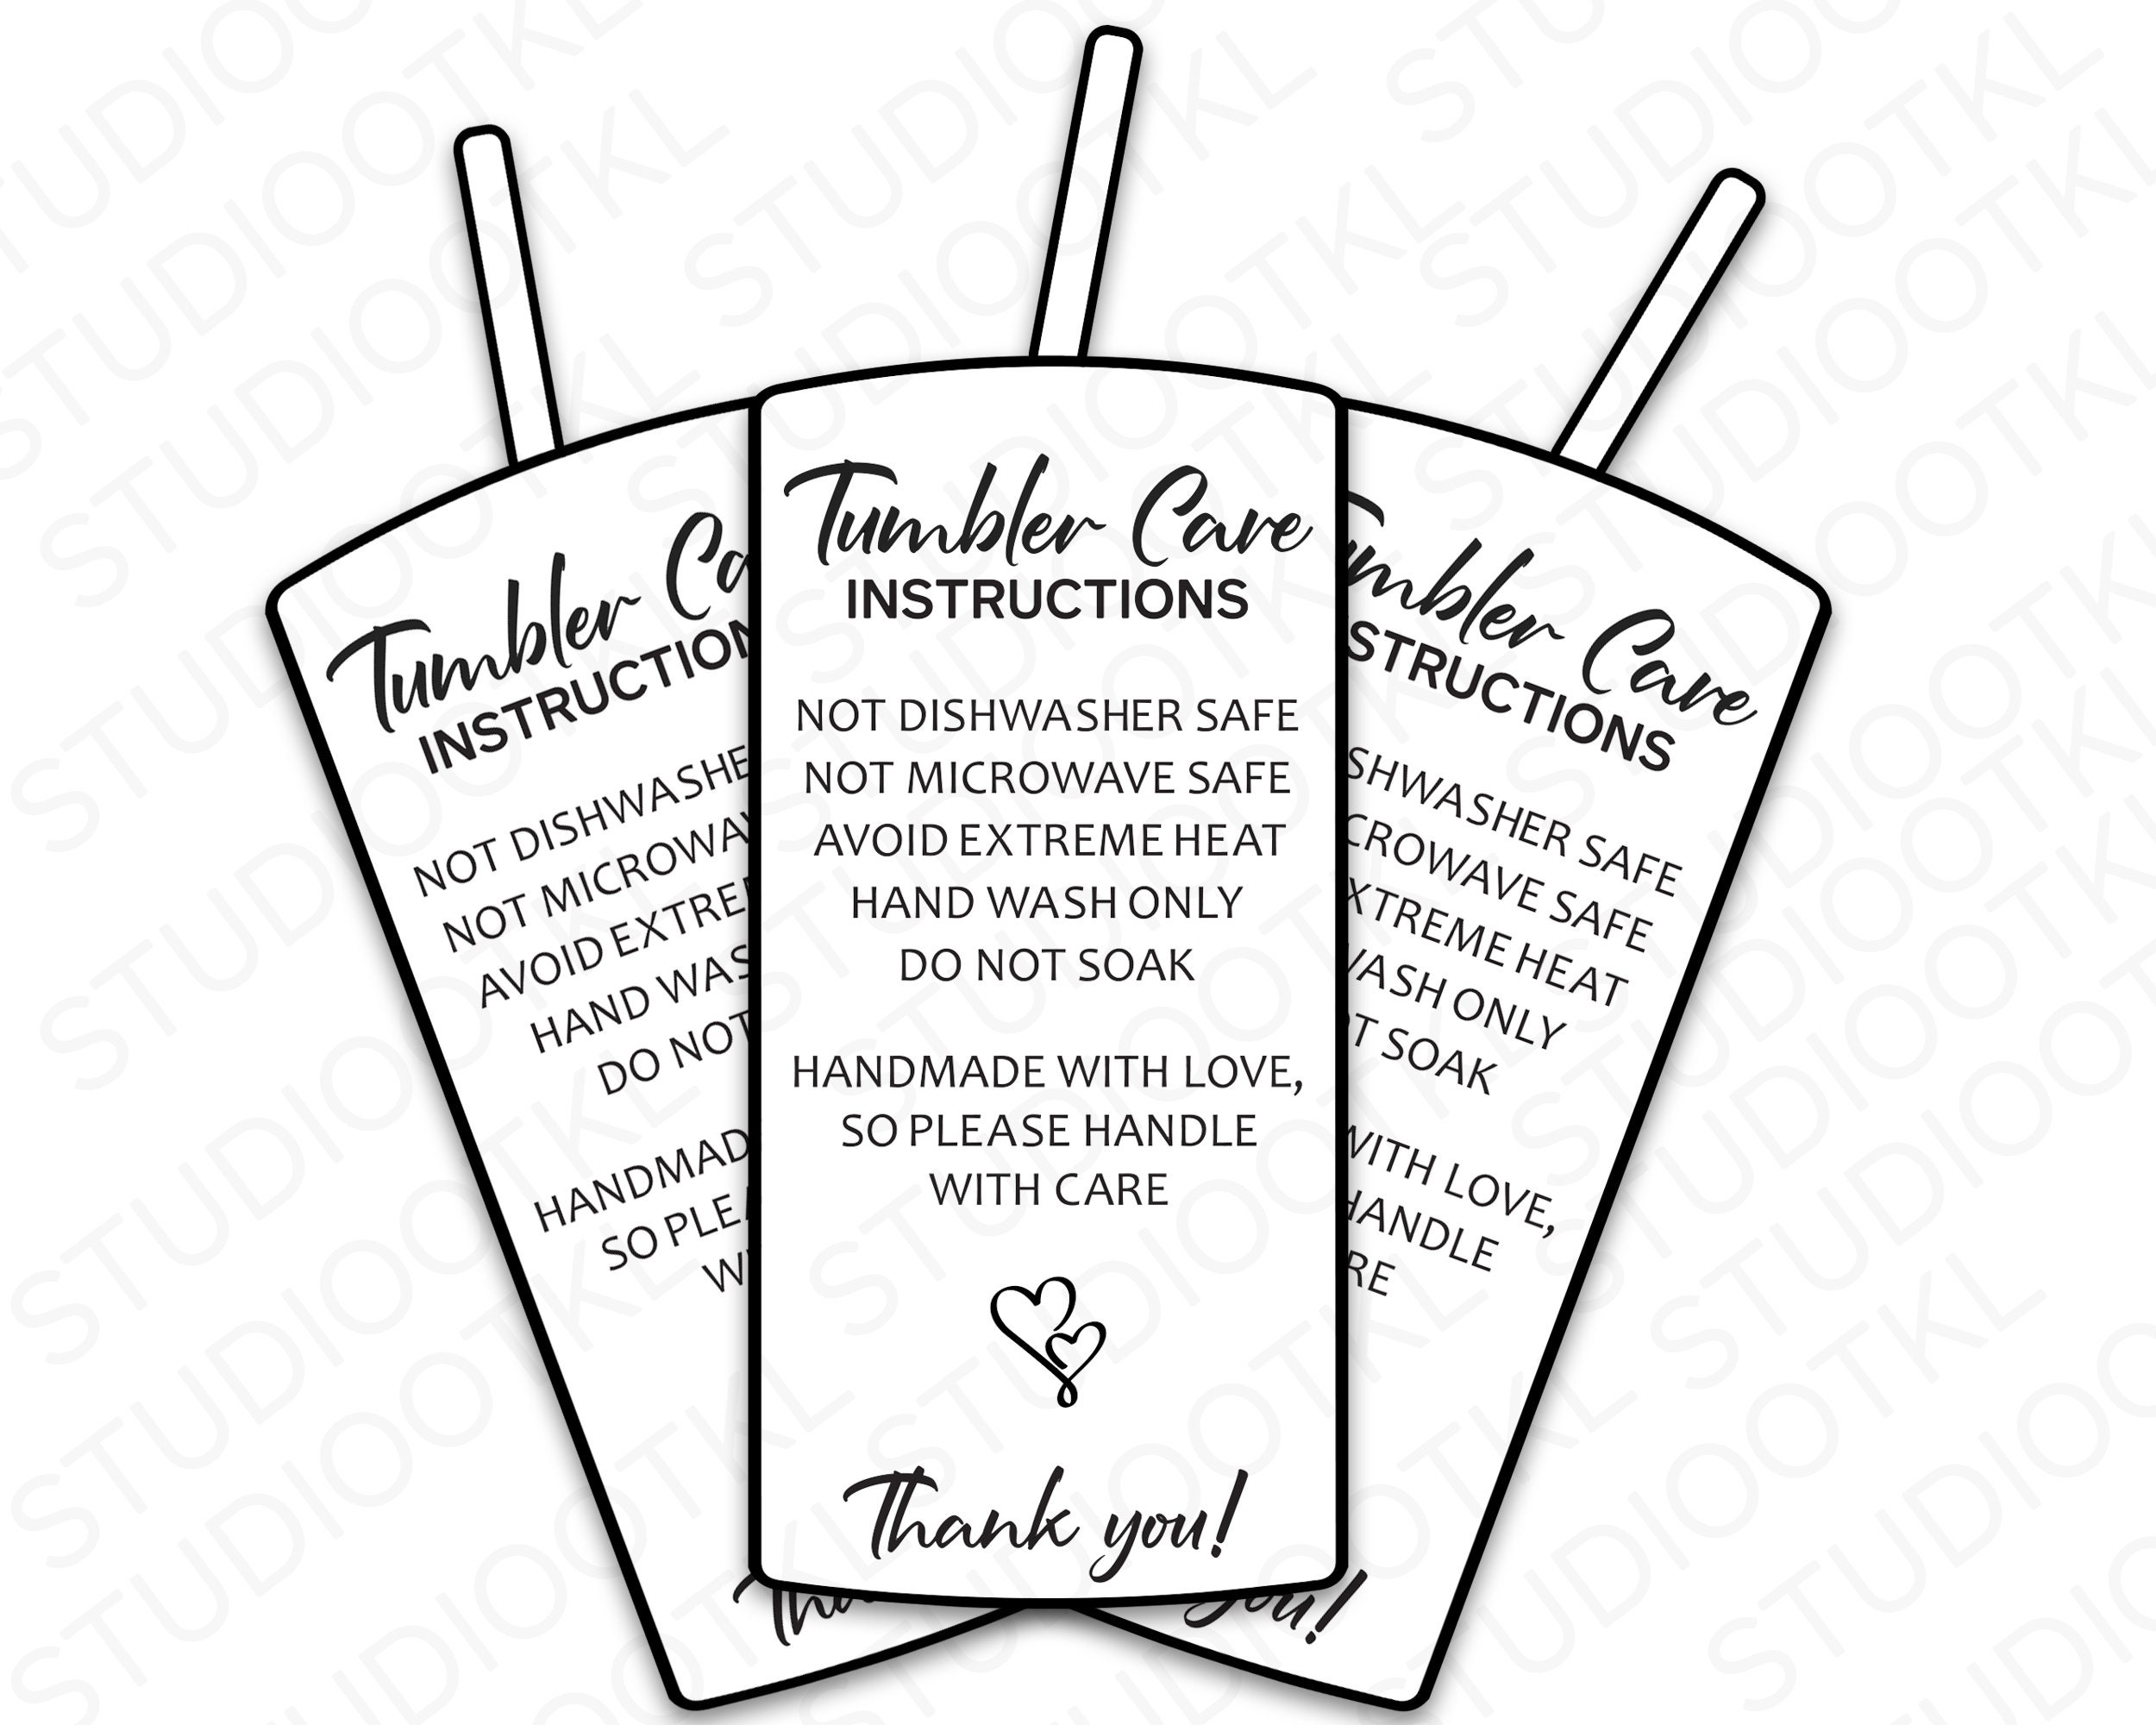 Skinny Tumbler Care Card, Cup Care Card Instruction Png, Small